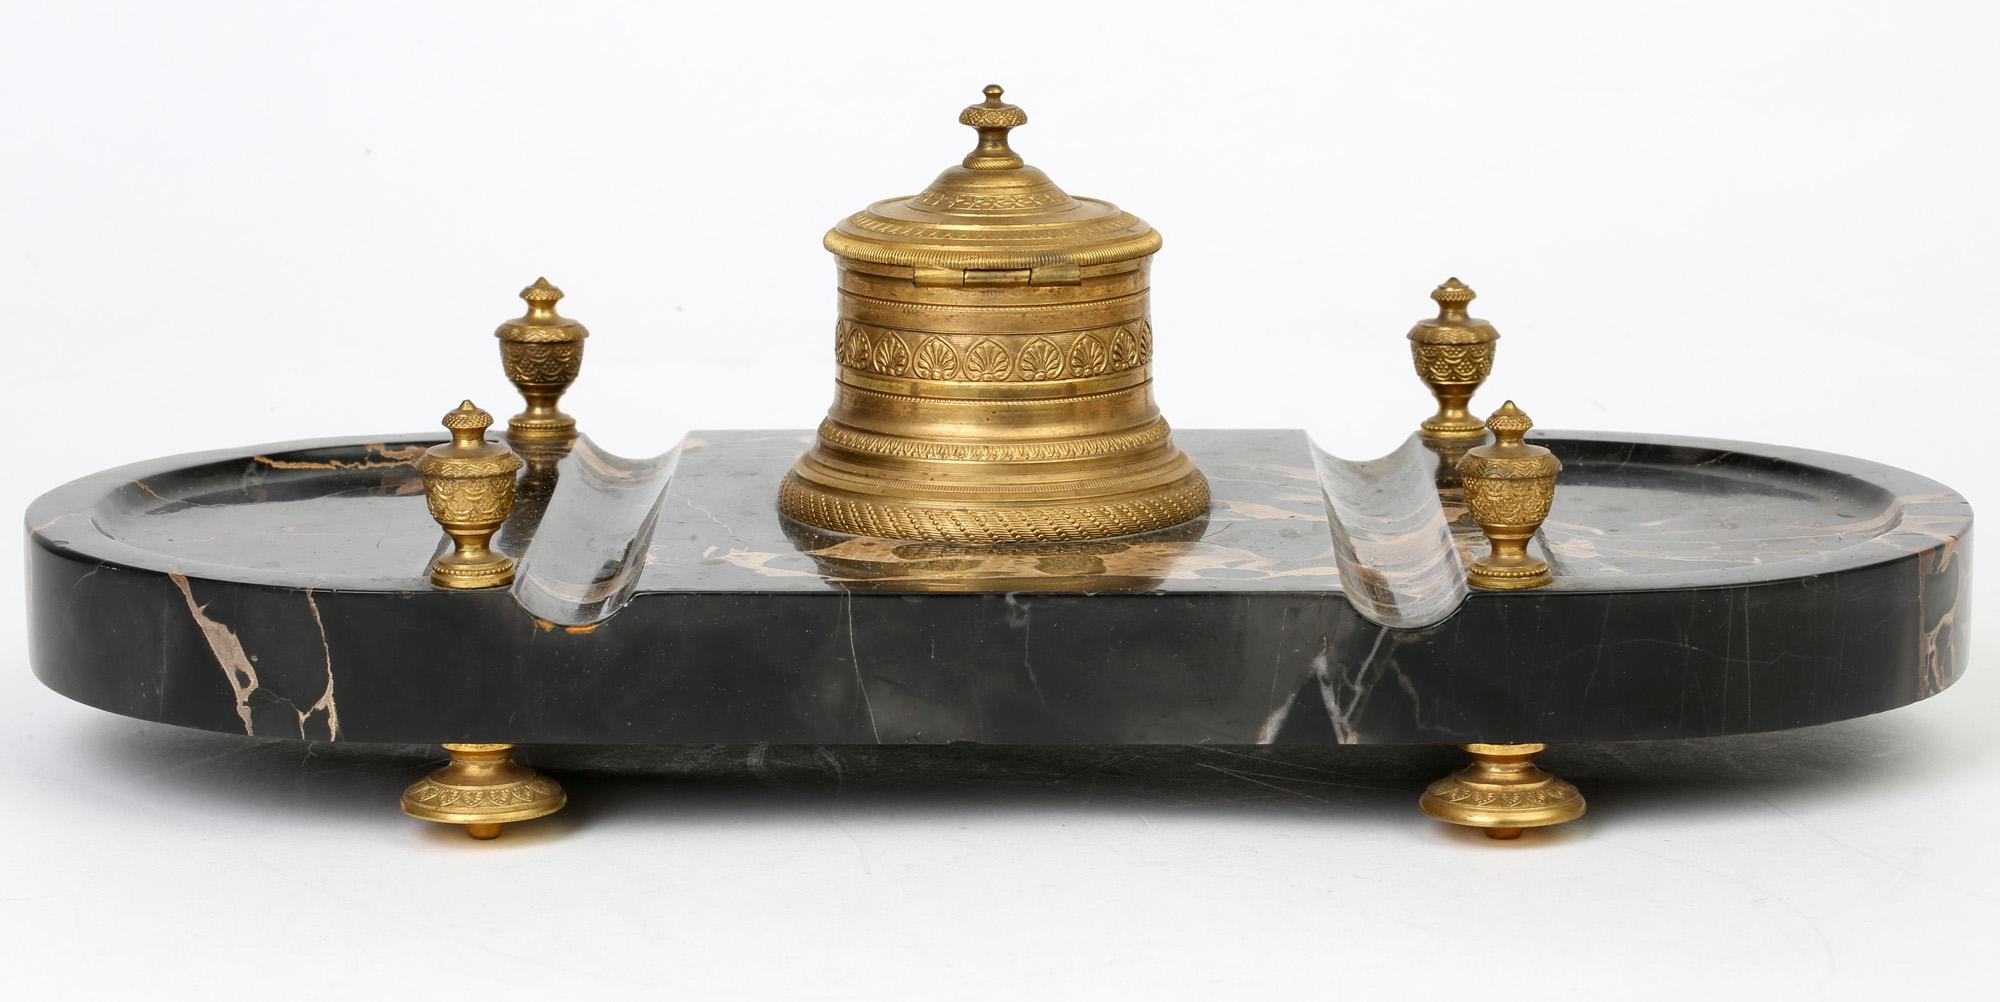 A stunning French ormolu mounted Empire style marble desk stand dating from the 19th century. This stylish stand is of rectangular shape with rounded polished ends and is made from a thick polished section of black marble with brown veining. The